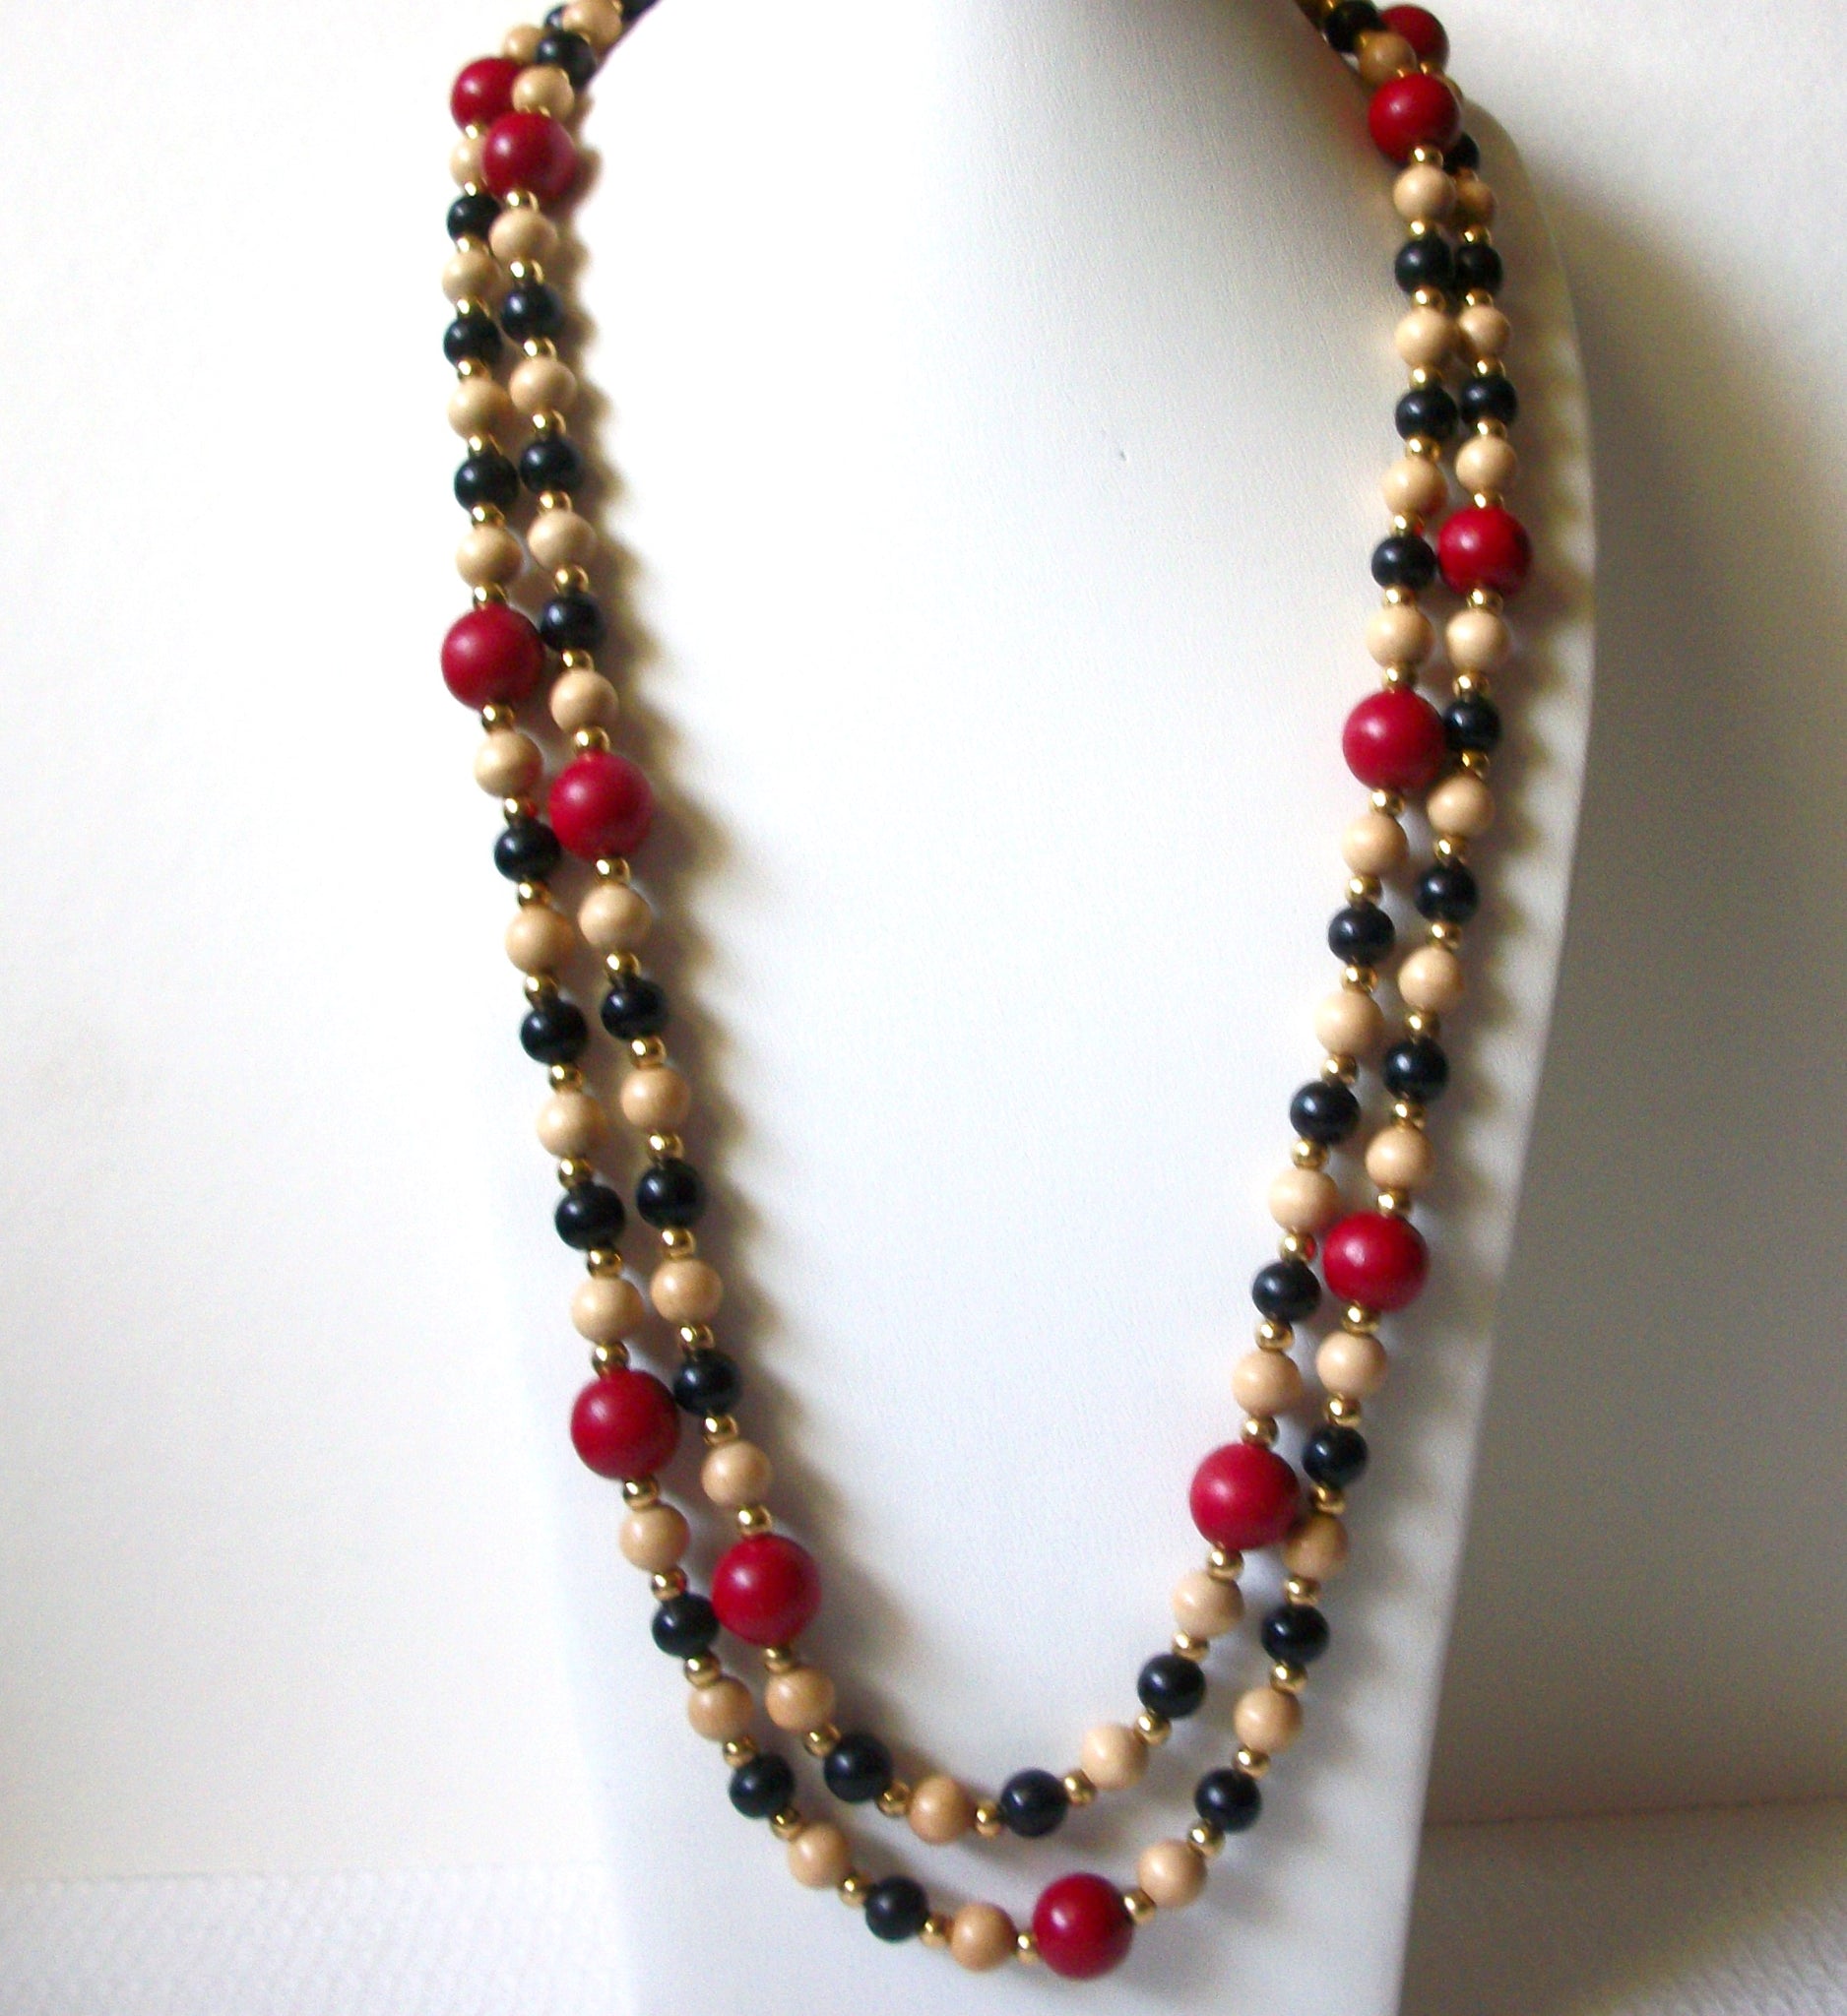 Bohemian Wood Beads Necklace 90920